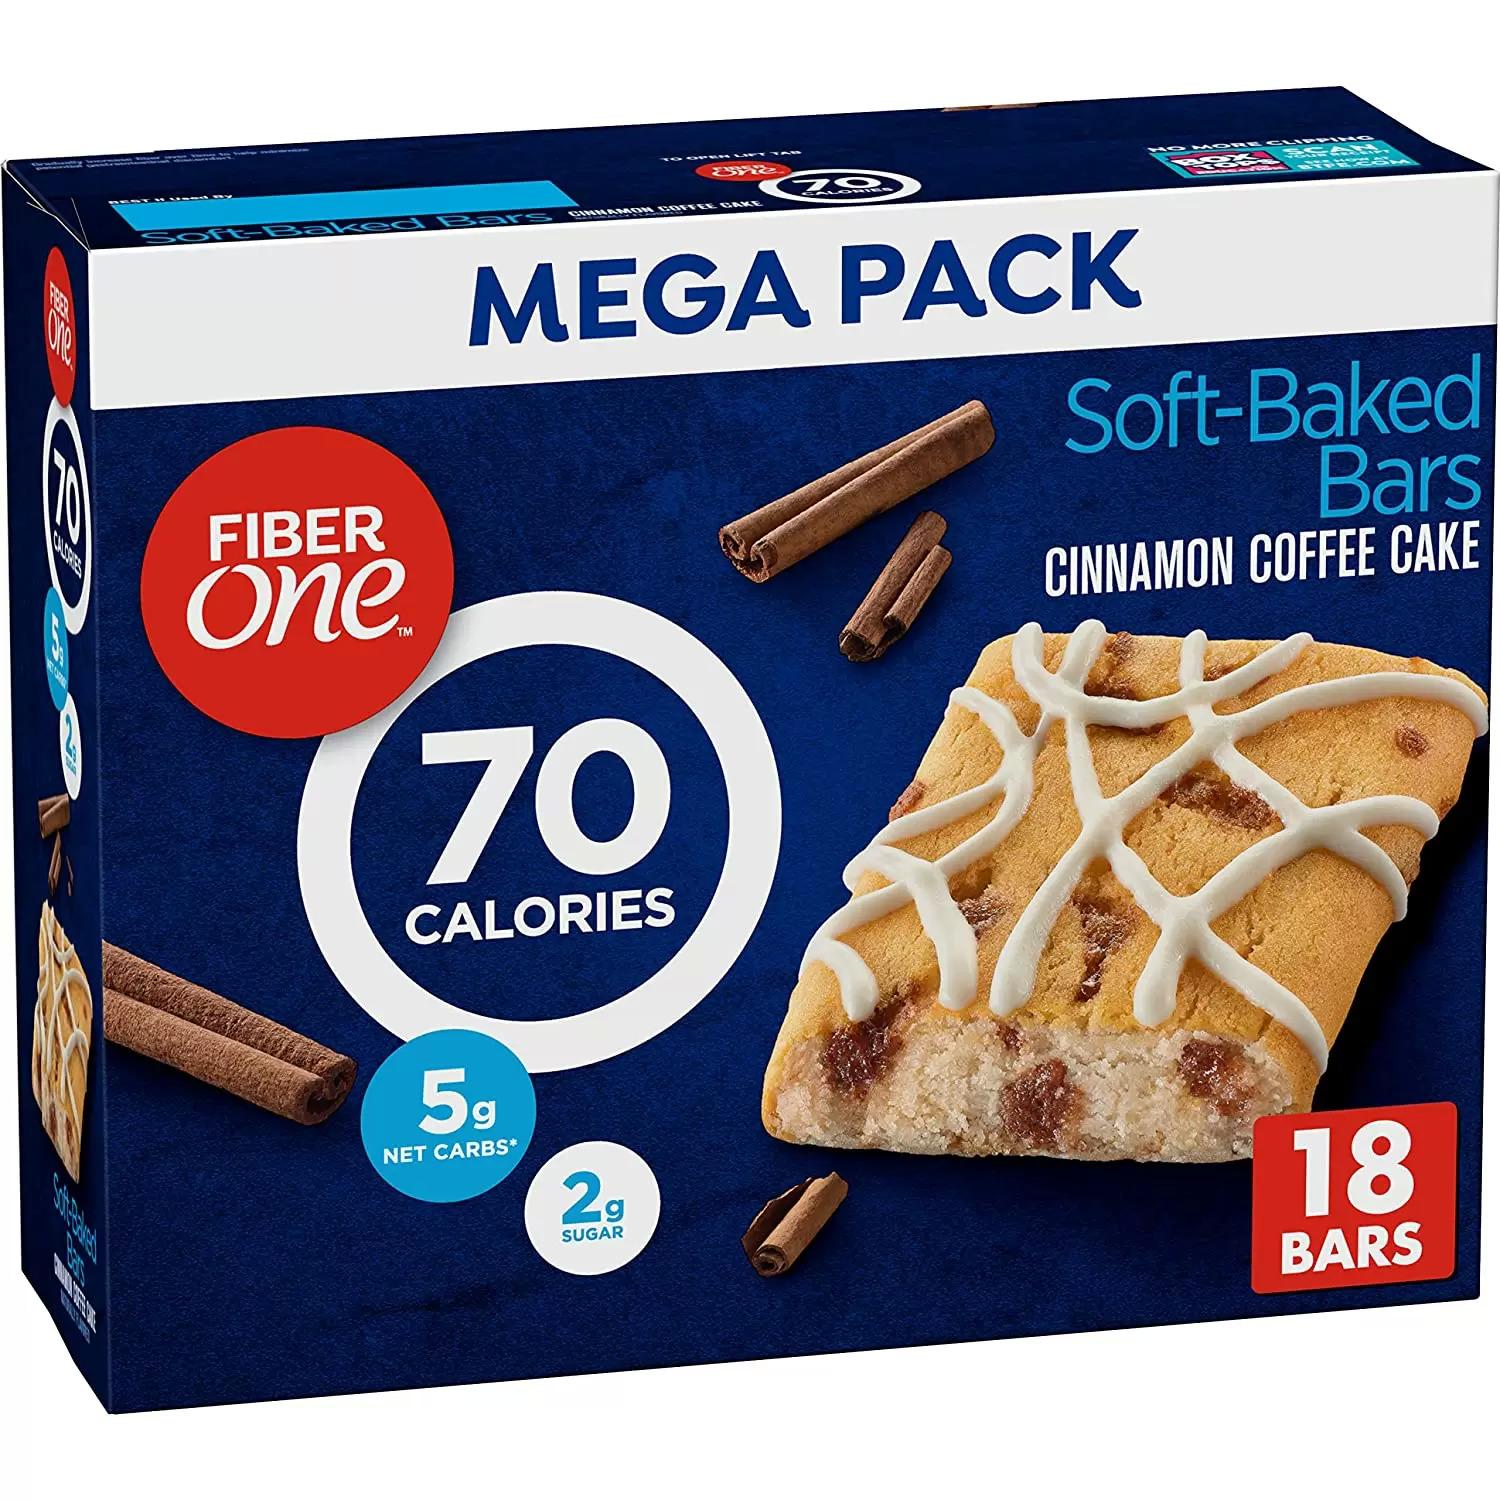 Fiber One Soft Baked Bars Cinnamon Coffee Cake 18 Pack for $6.32 Shipped